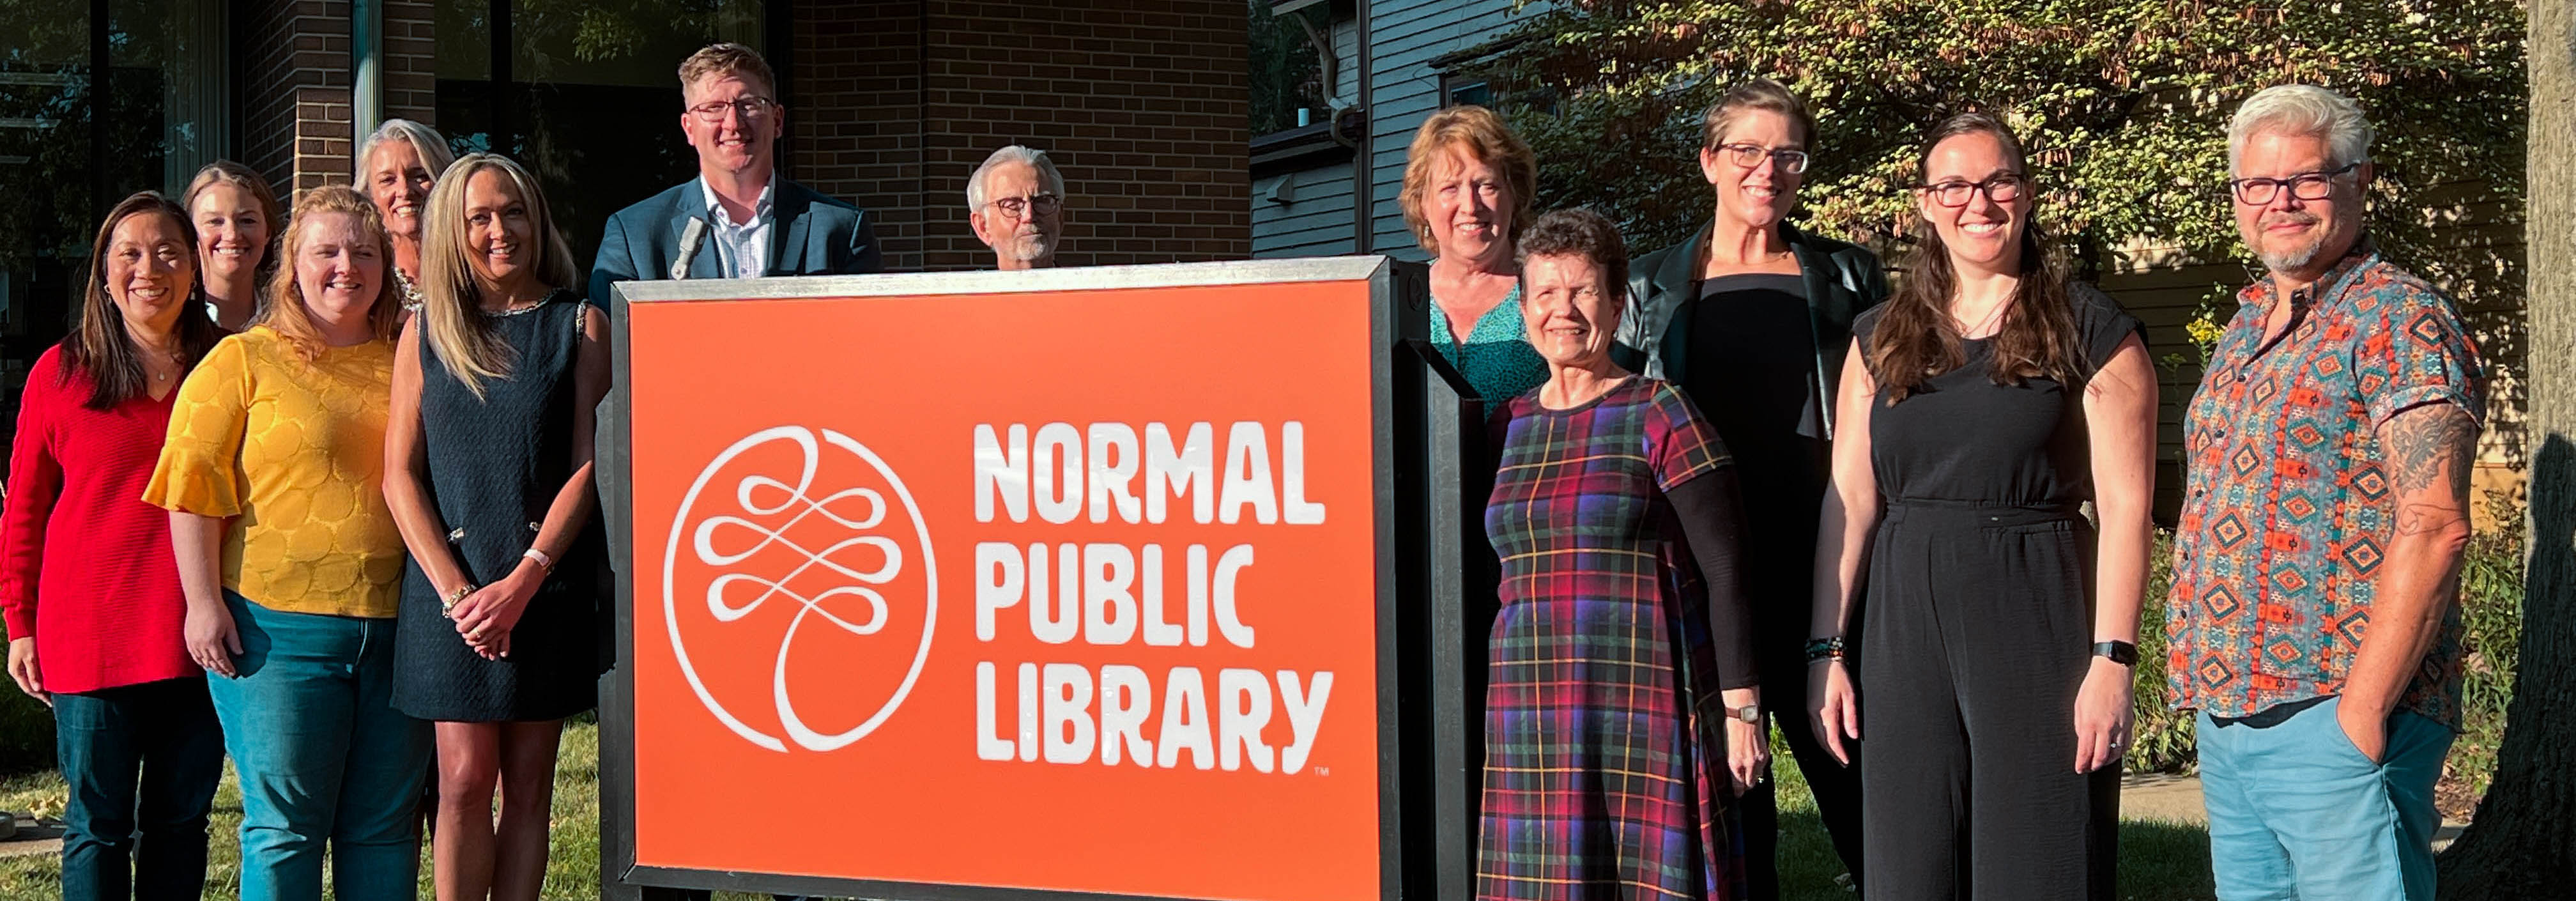 Normal Public Library Foundation Board posed with Normal Public Library sign